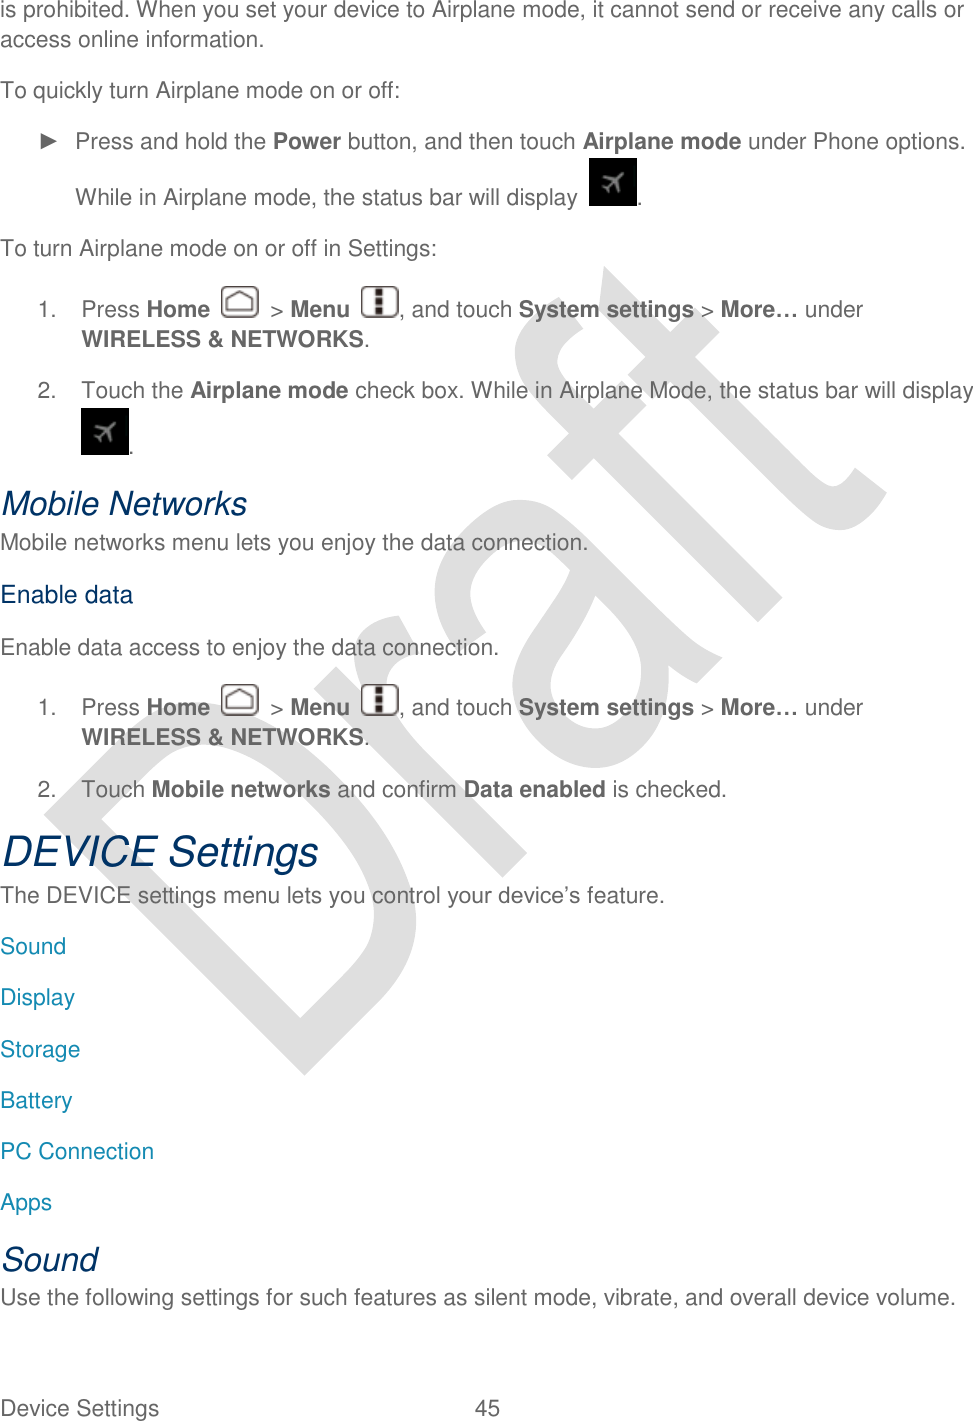  Device Settings  45   is prohibited. When you set your device to Airplane mode, it cannot send or receive any calls or access online information. To quickly turn Airplane mode on or off: ►  Press and hold the Power button, and then touch Airplane mode under Phone options. While in Airplane mode, the status bar will display  . To turn Airplane mode on or off in Settings: 1.  Press Home    &gt; Menu  , and touch System settings &gt; More… under WIRELESS &amp; NETWORKS. 2.  Touch the Airplane mode check box. While in Airplane Mode, the status bar will display . Mobile Networks Mobile networks menu lets you enjoy the data connection. Enable data Enable data access to enjoy the data connection. 1.  Press Home    &gt; Menu  , and touch System settings &gt; More… under WIRELESS &amp; NETWORKS. 2.  Touch Mobile networks and confirm Data enabled is checked.   DEVICE Settings The DEVICE settings menu lets you control your device‟s feature. Sound Display Storage Battery PC Connection Apps Sound Use the following settings for such features as silent mode, vibrate, and overall device volume.   